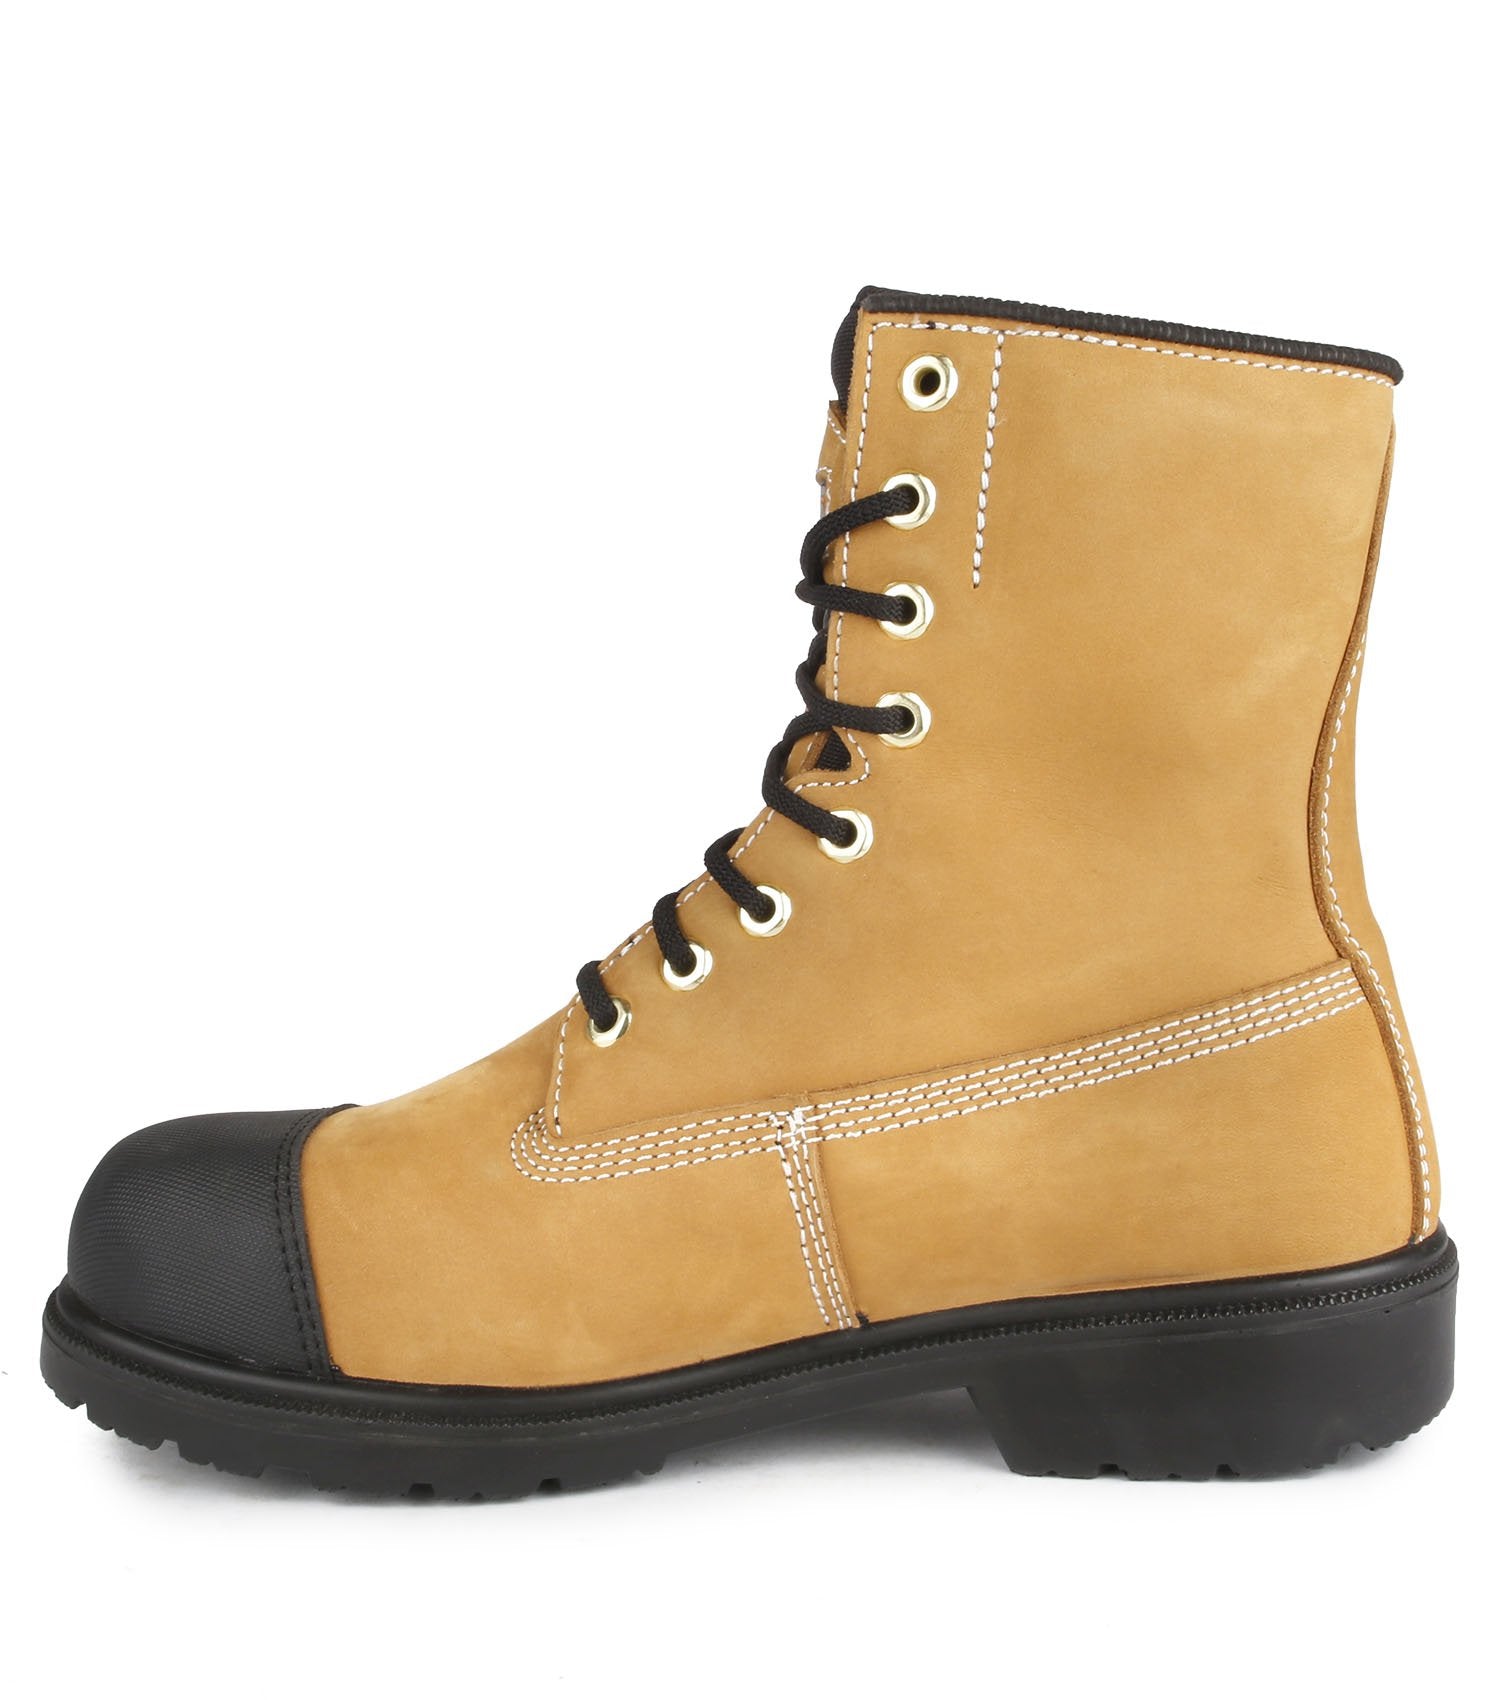 STC Hardcore 8" Norwegian Cut Safety Boots | Tan | Sizes 7 - 14 Work Boots - Cleanflow